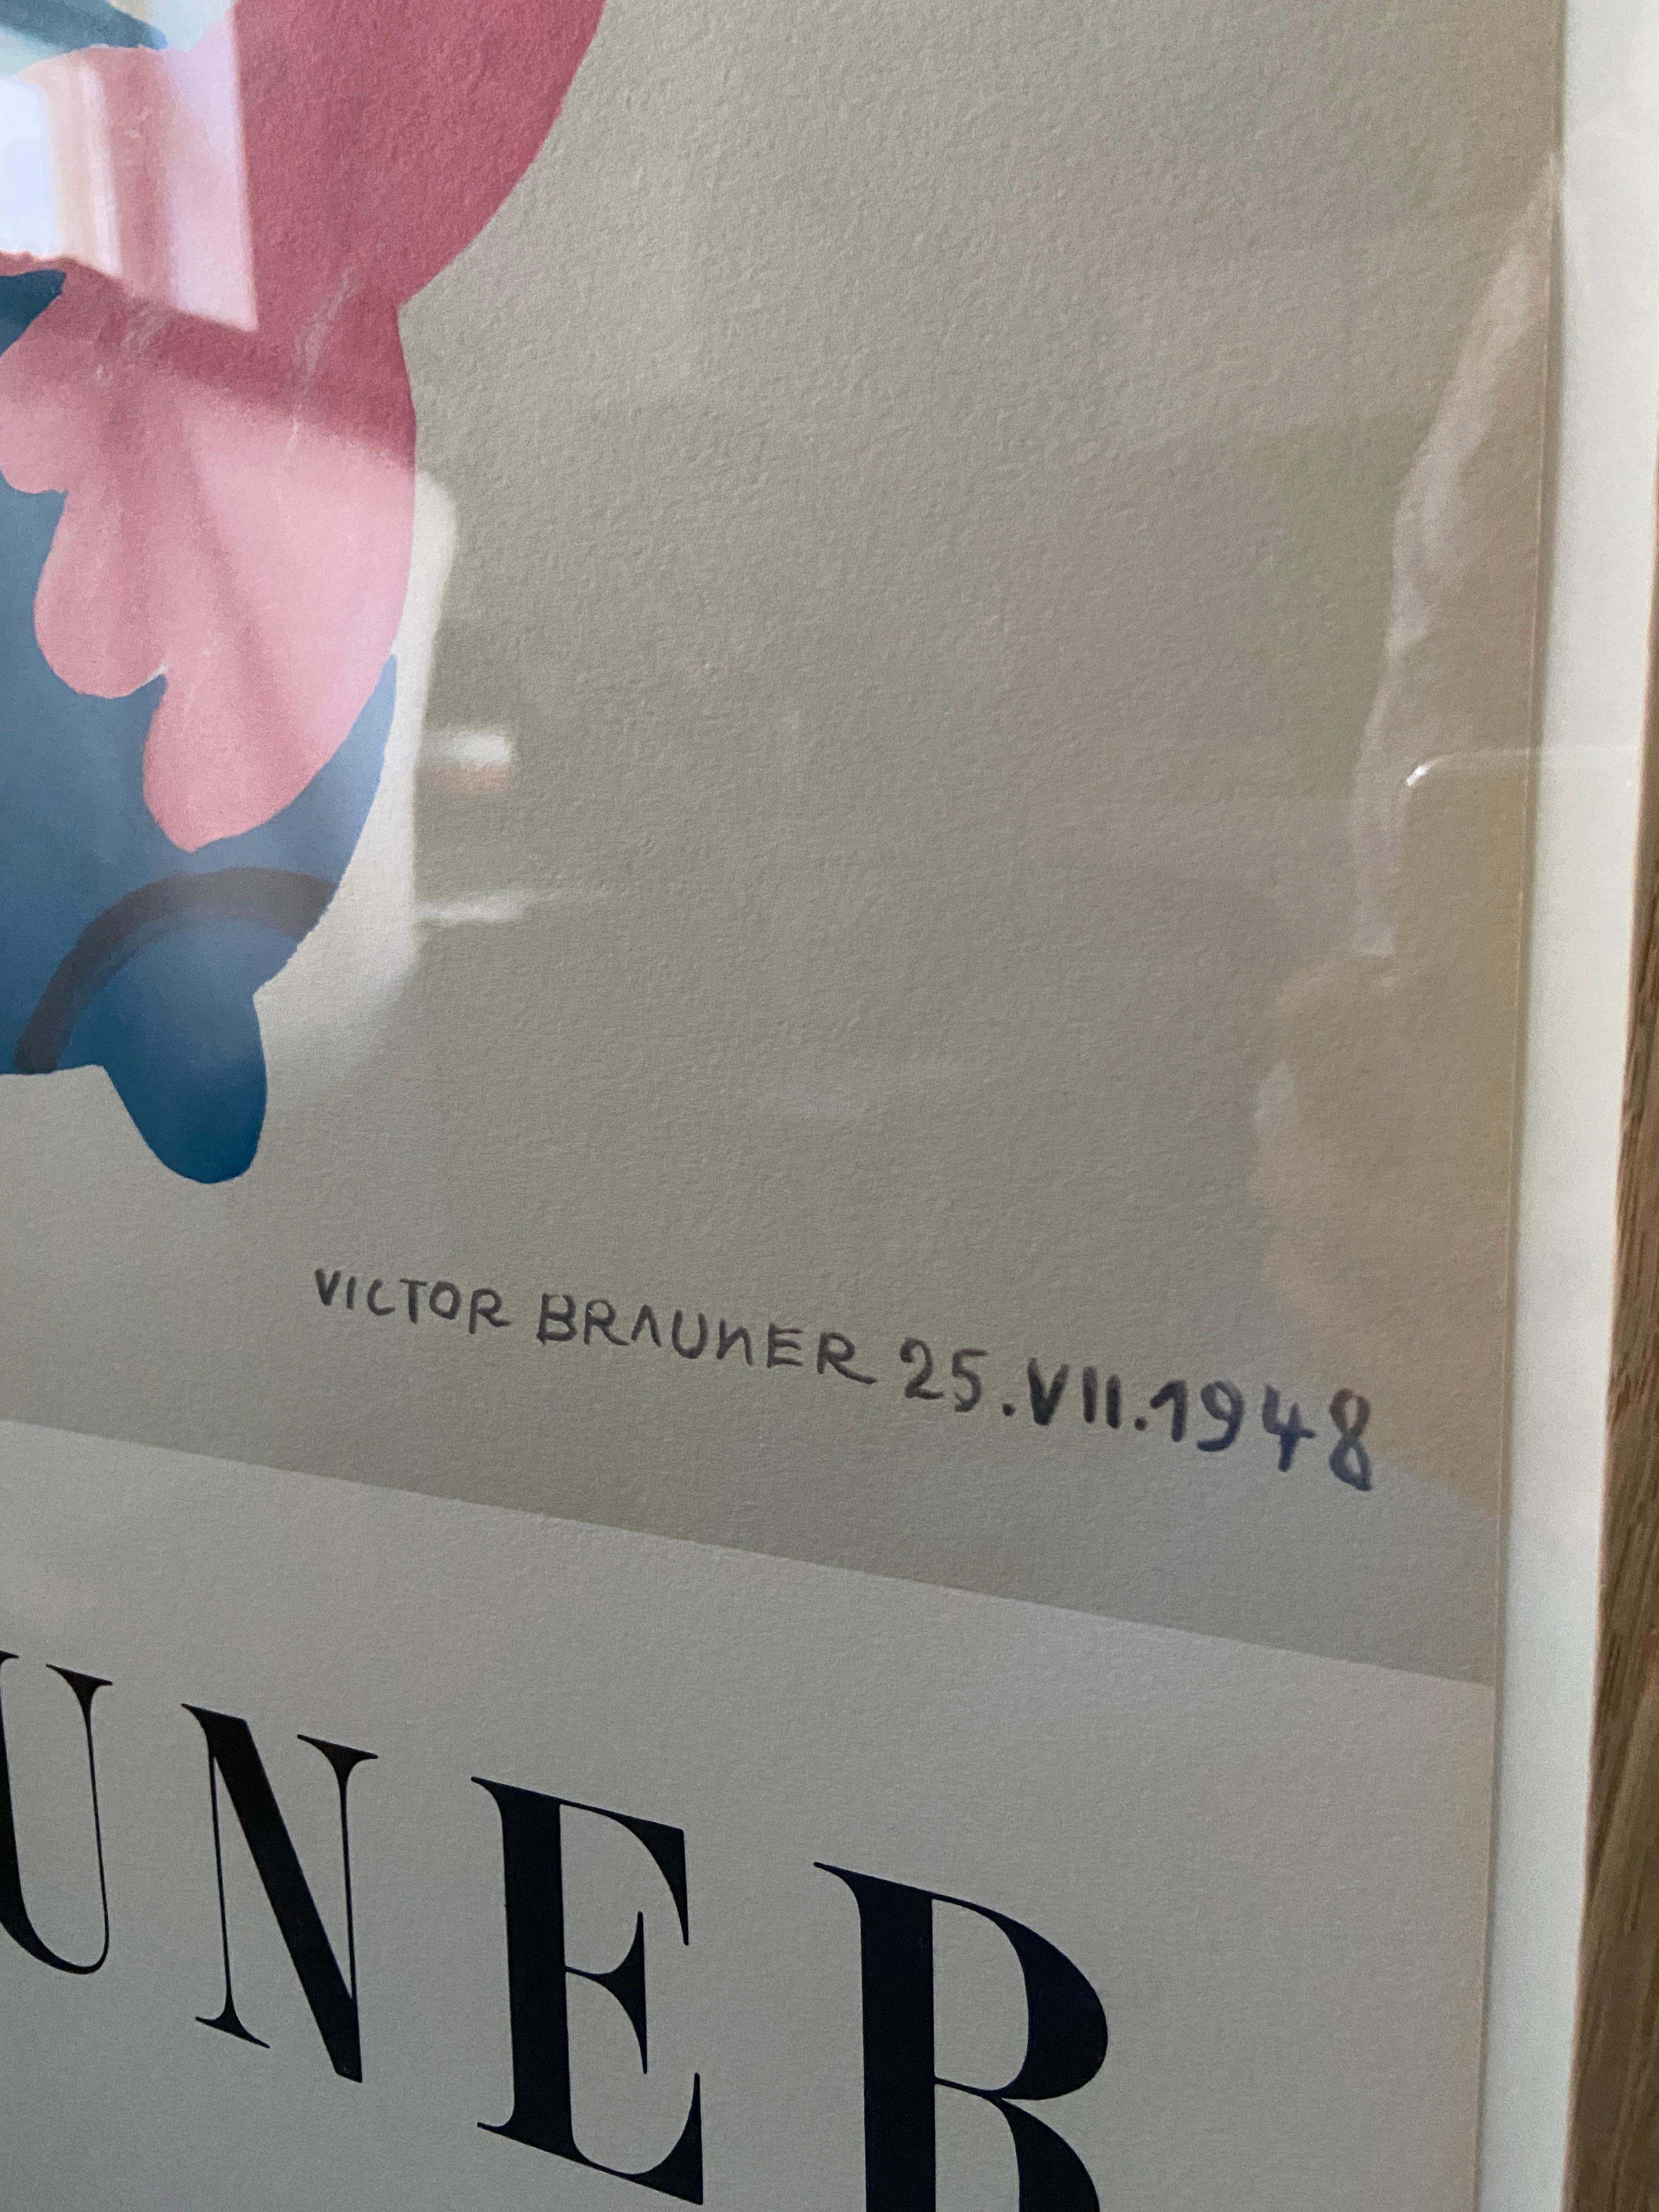 Late 20th Century Vintage Victor Brauner Galerie Alexandre Iolas Exhibition Poster, France, 1970 For Sale